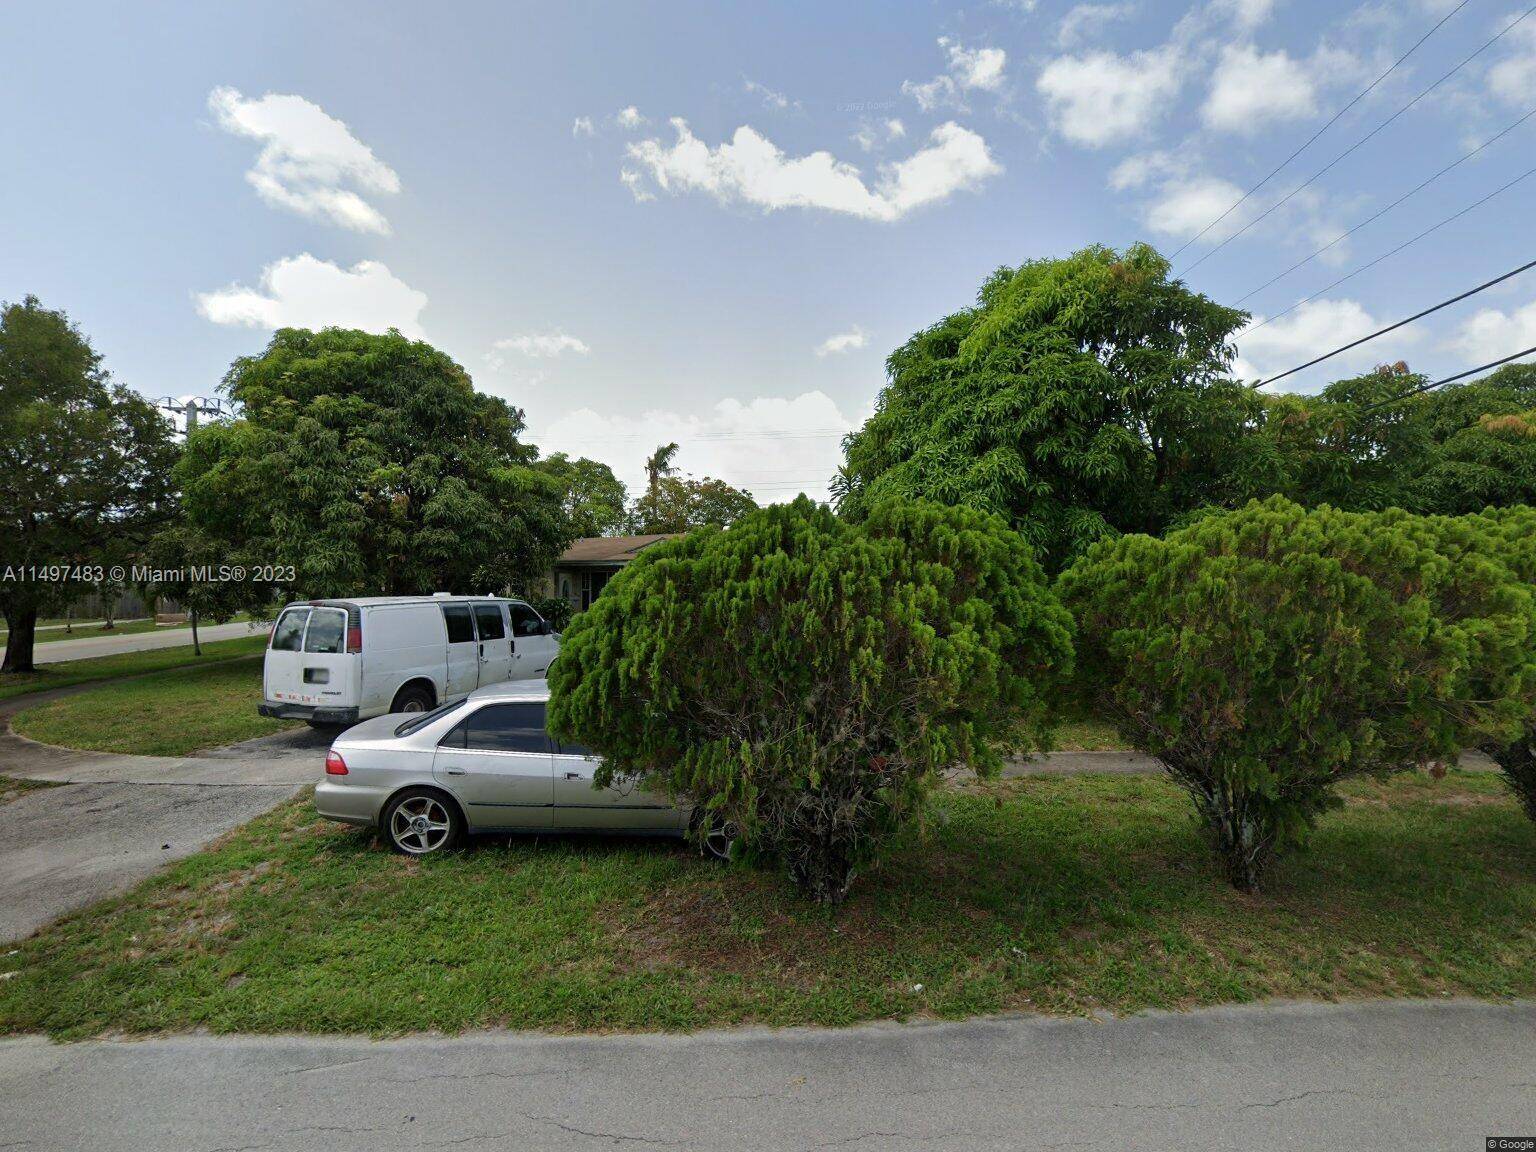 3 bedroom, 2 bathroom single family home located in a higly sought after area of Lauderhill, Fl.